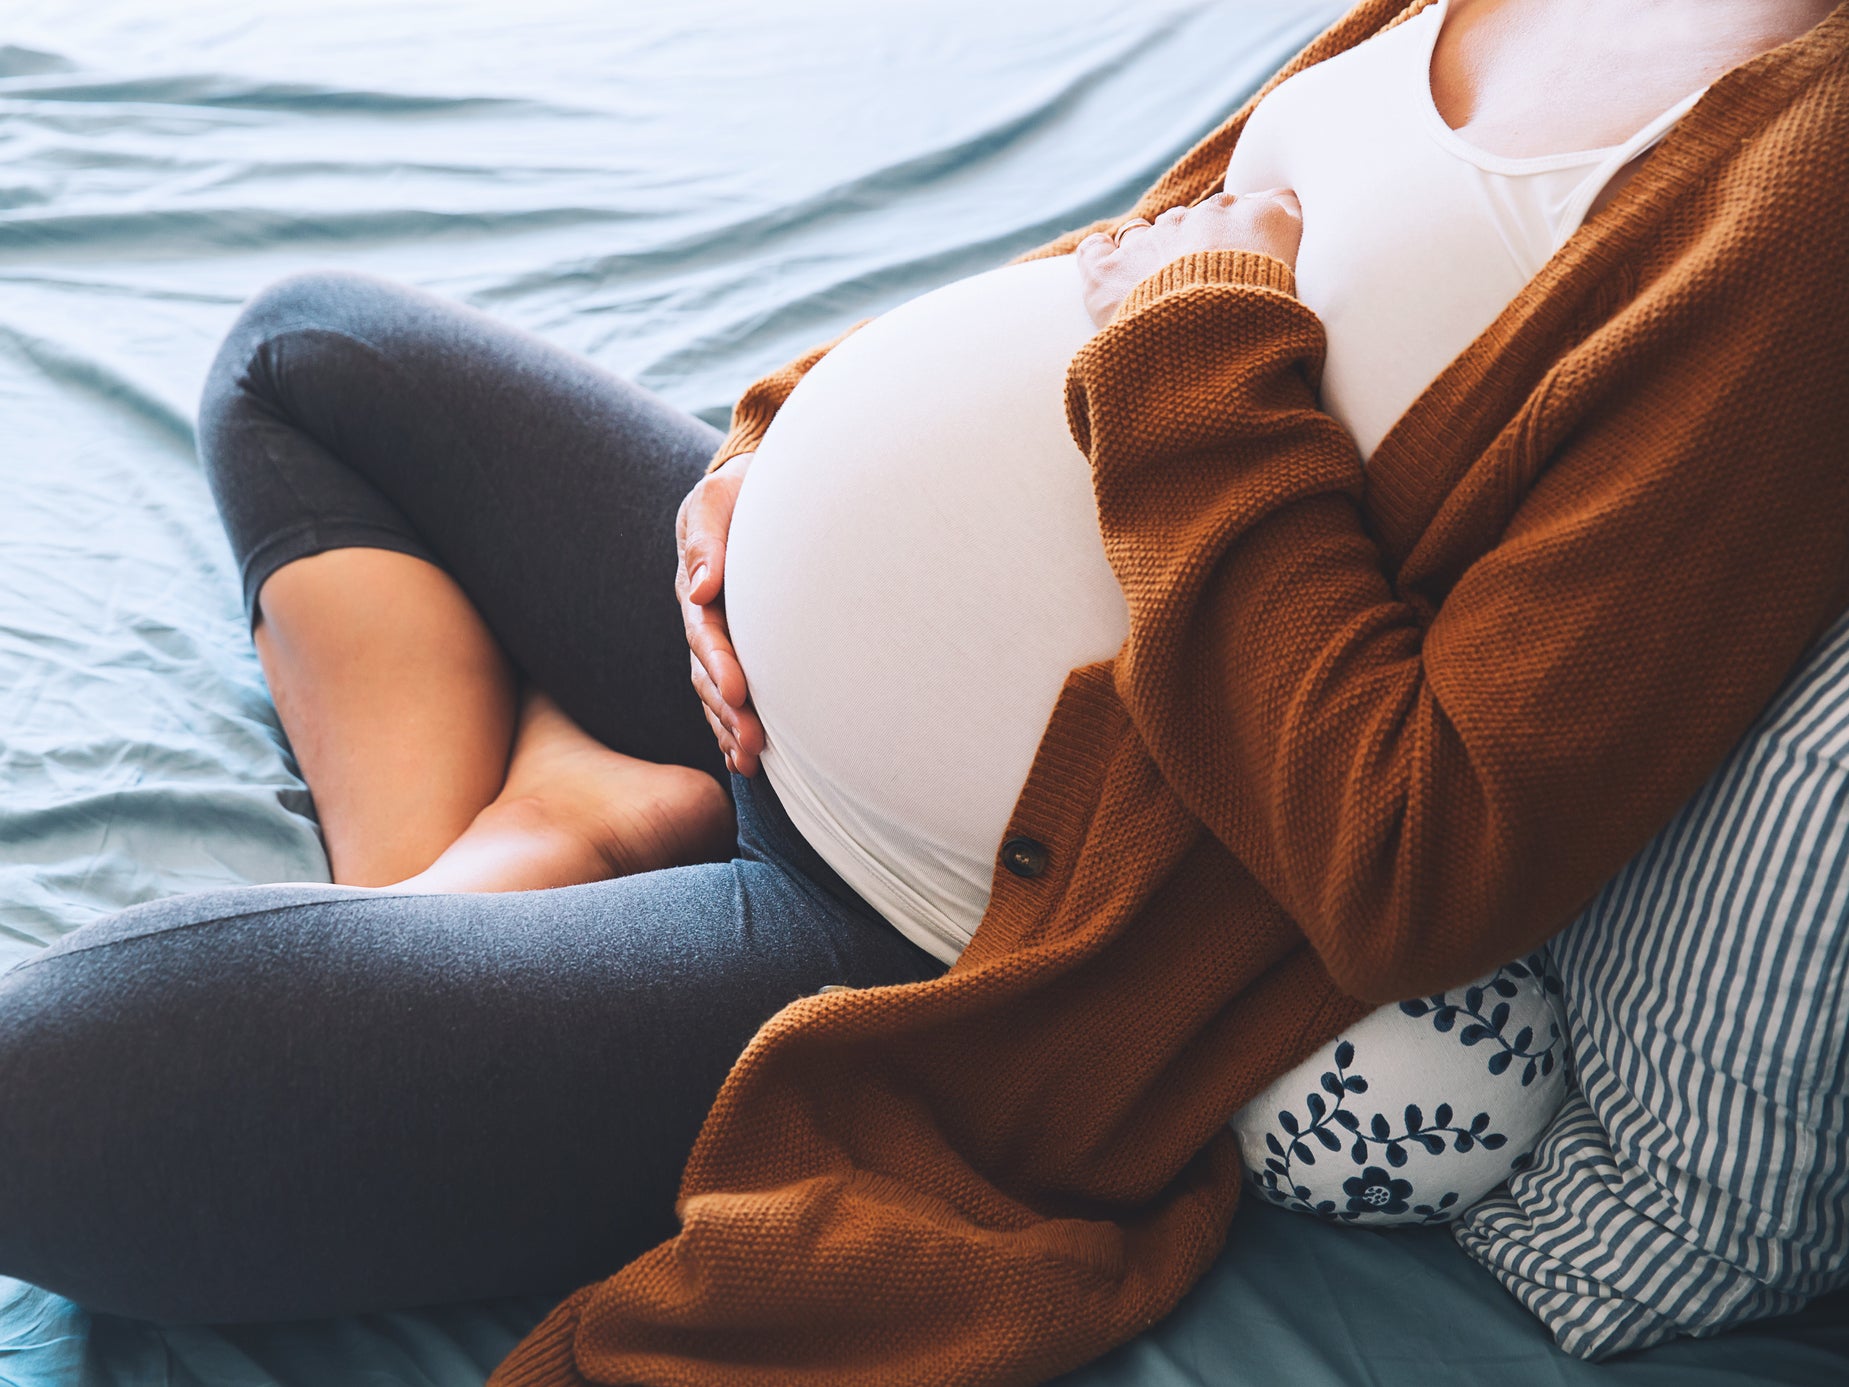 There is a ‘profound lack of awareness and understanding’ around pregnancy coercion